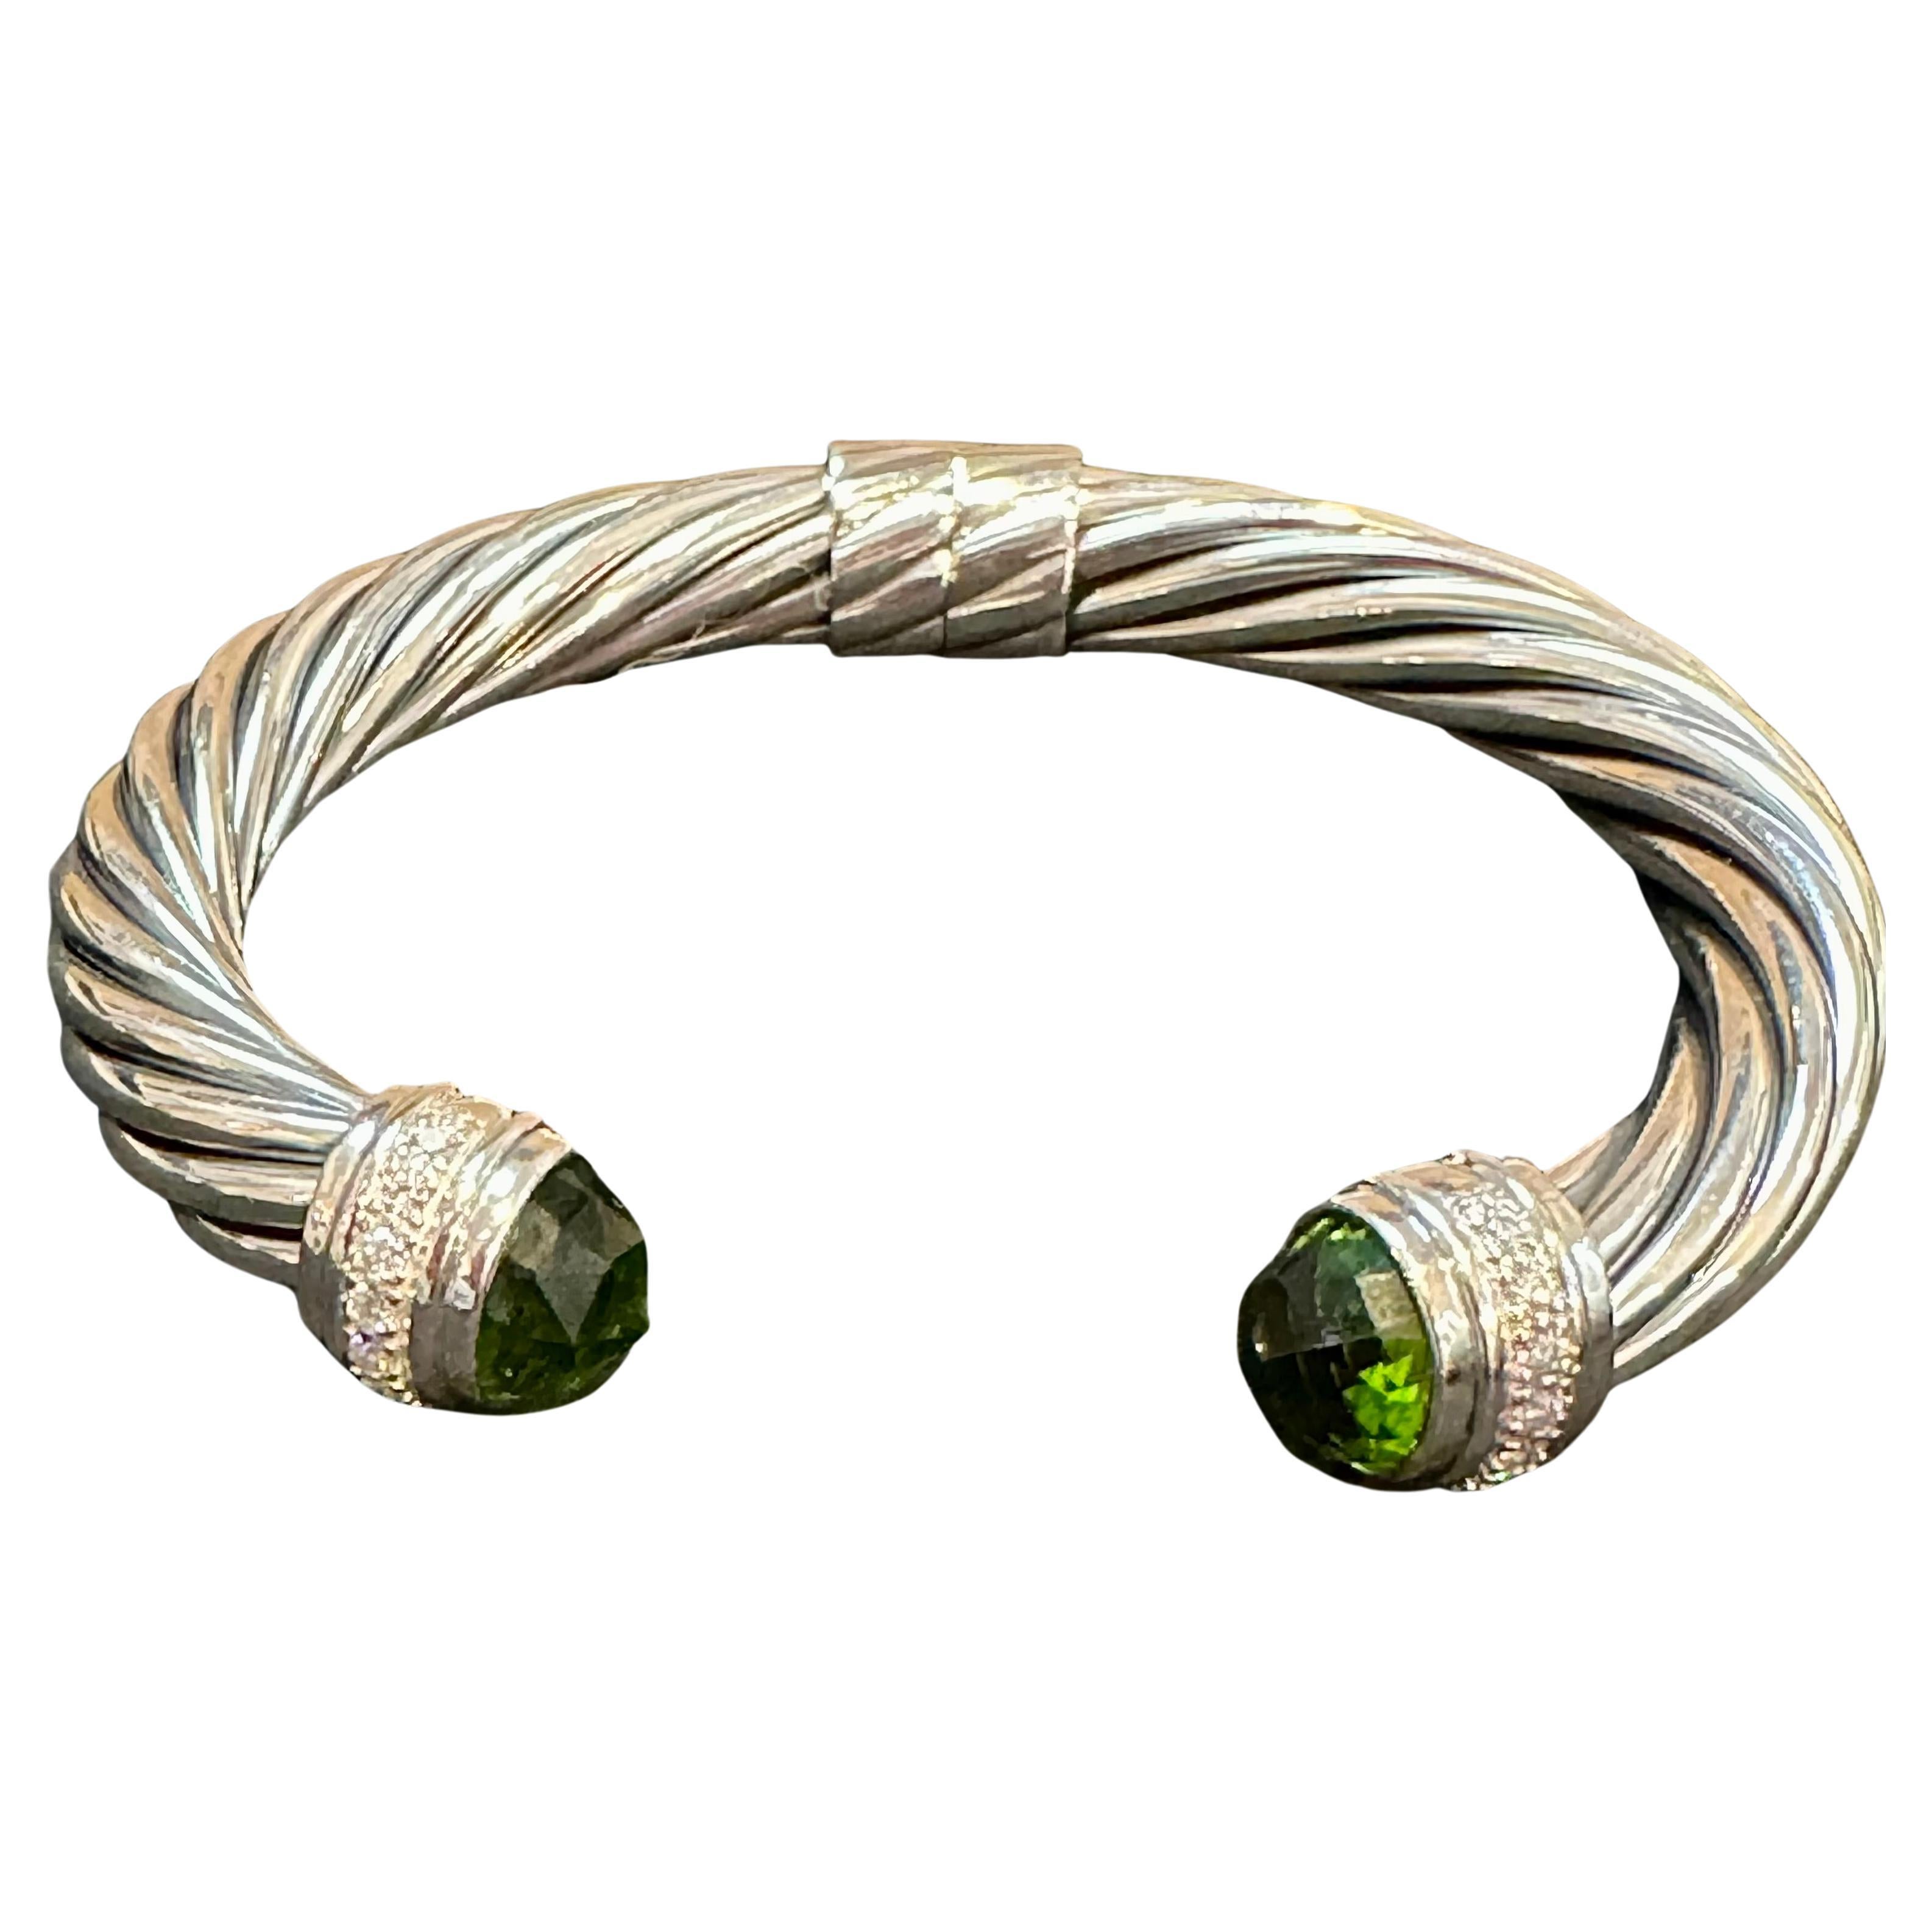 DY Cable Classics Bracelet Sterling Silver Peridot & Pave Diamond Hinged Bangle